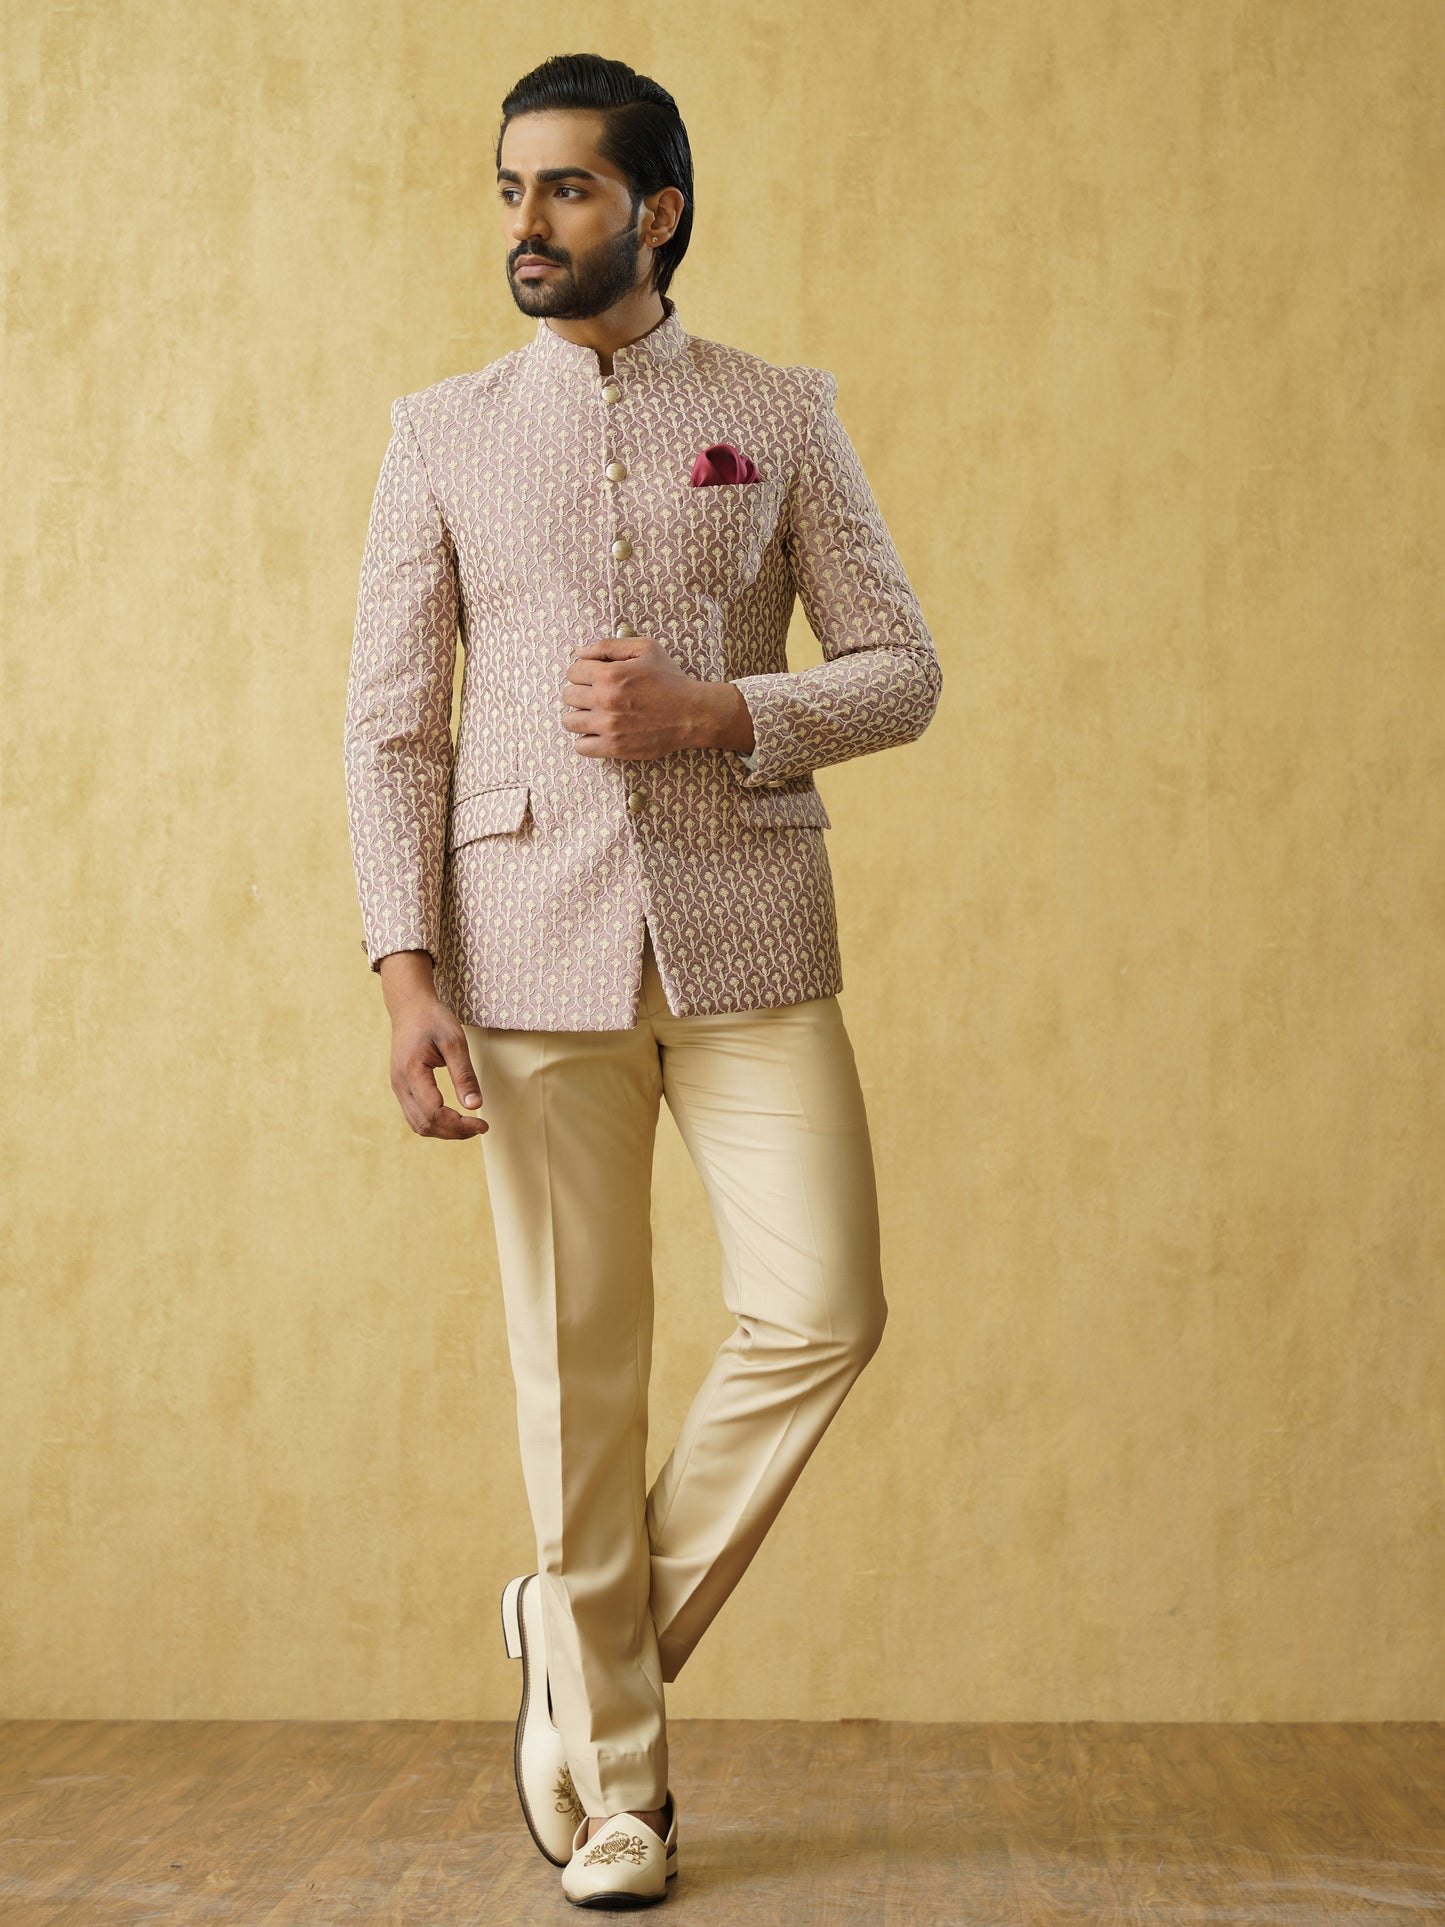 Orchid Pink Bandhgala suit